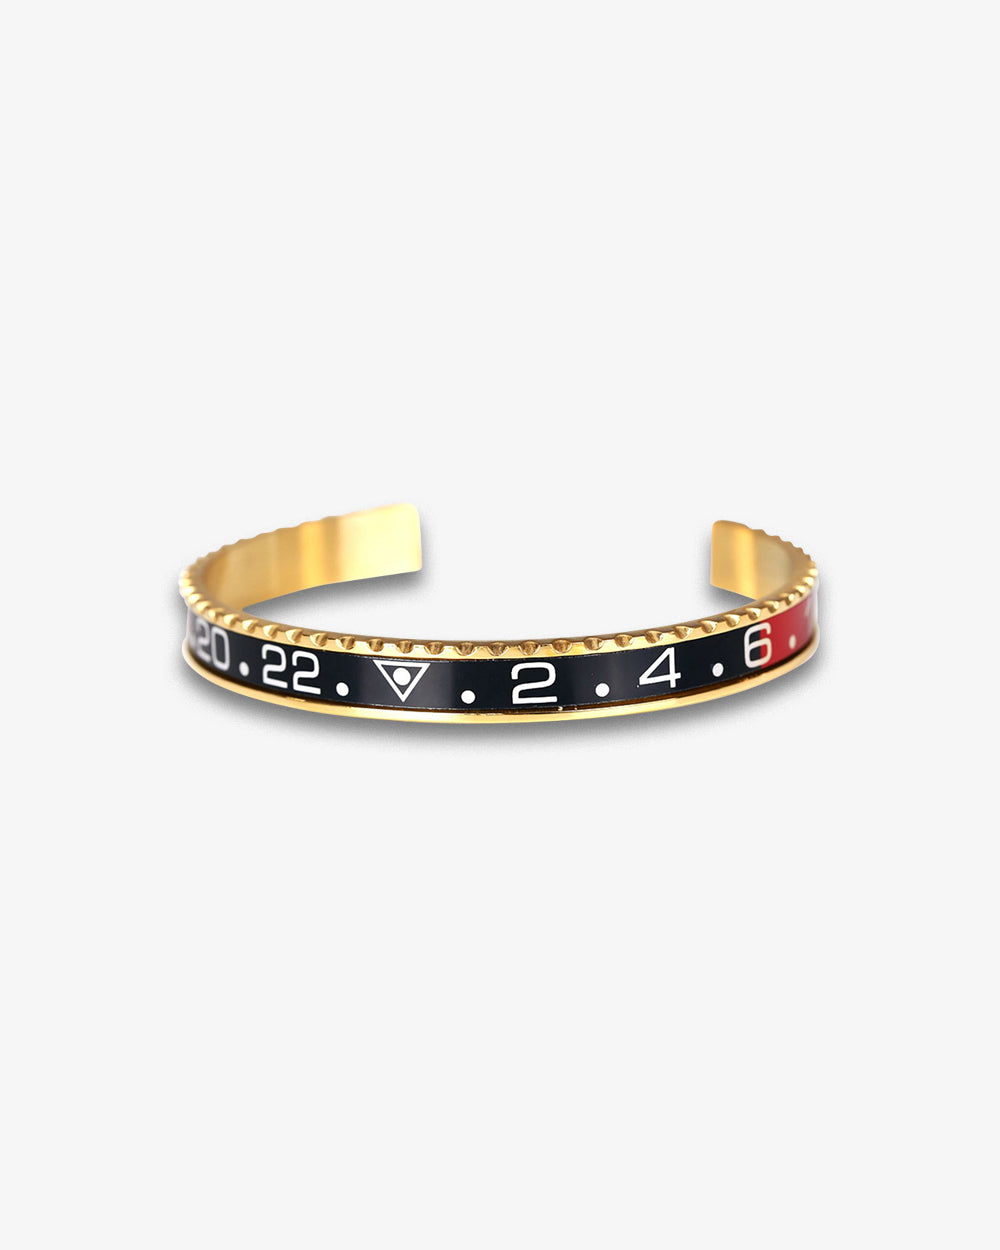 Swiss Concept Classic Dual Time GMT II 'Coke' Speed Bracelet (Yellow Gold) - Stainless Steel